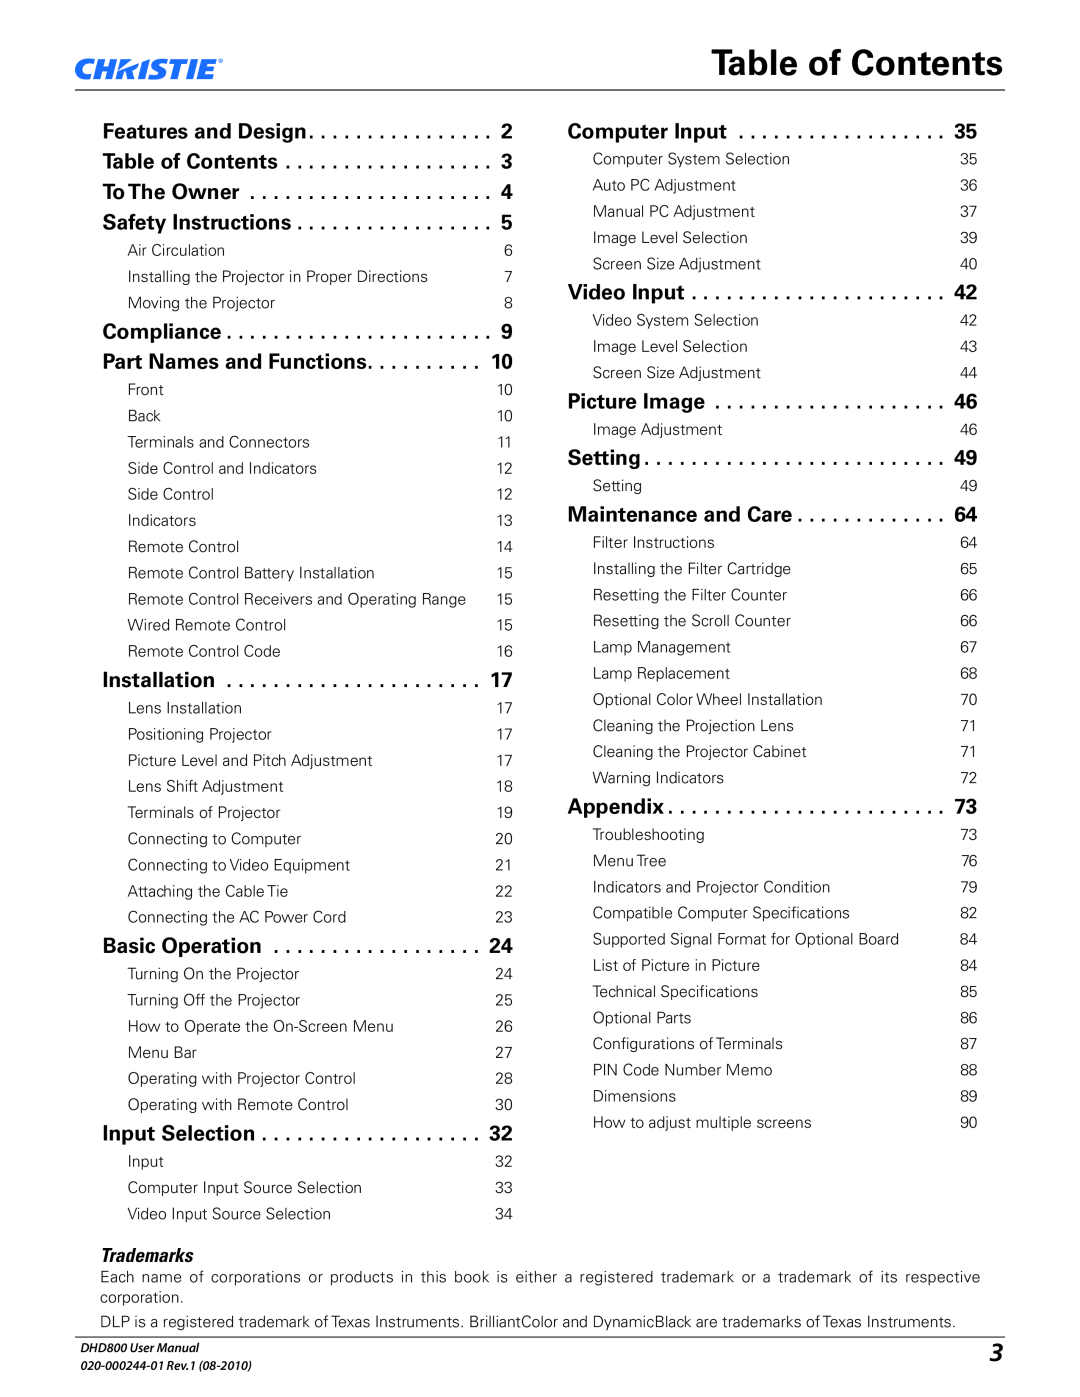 Christie Digital Systems DHD800 user manual Table of Contents 